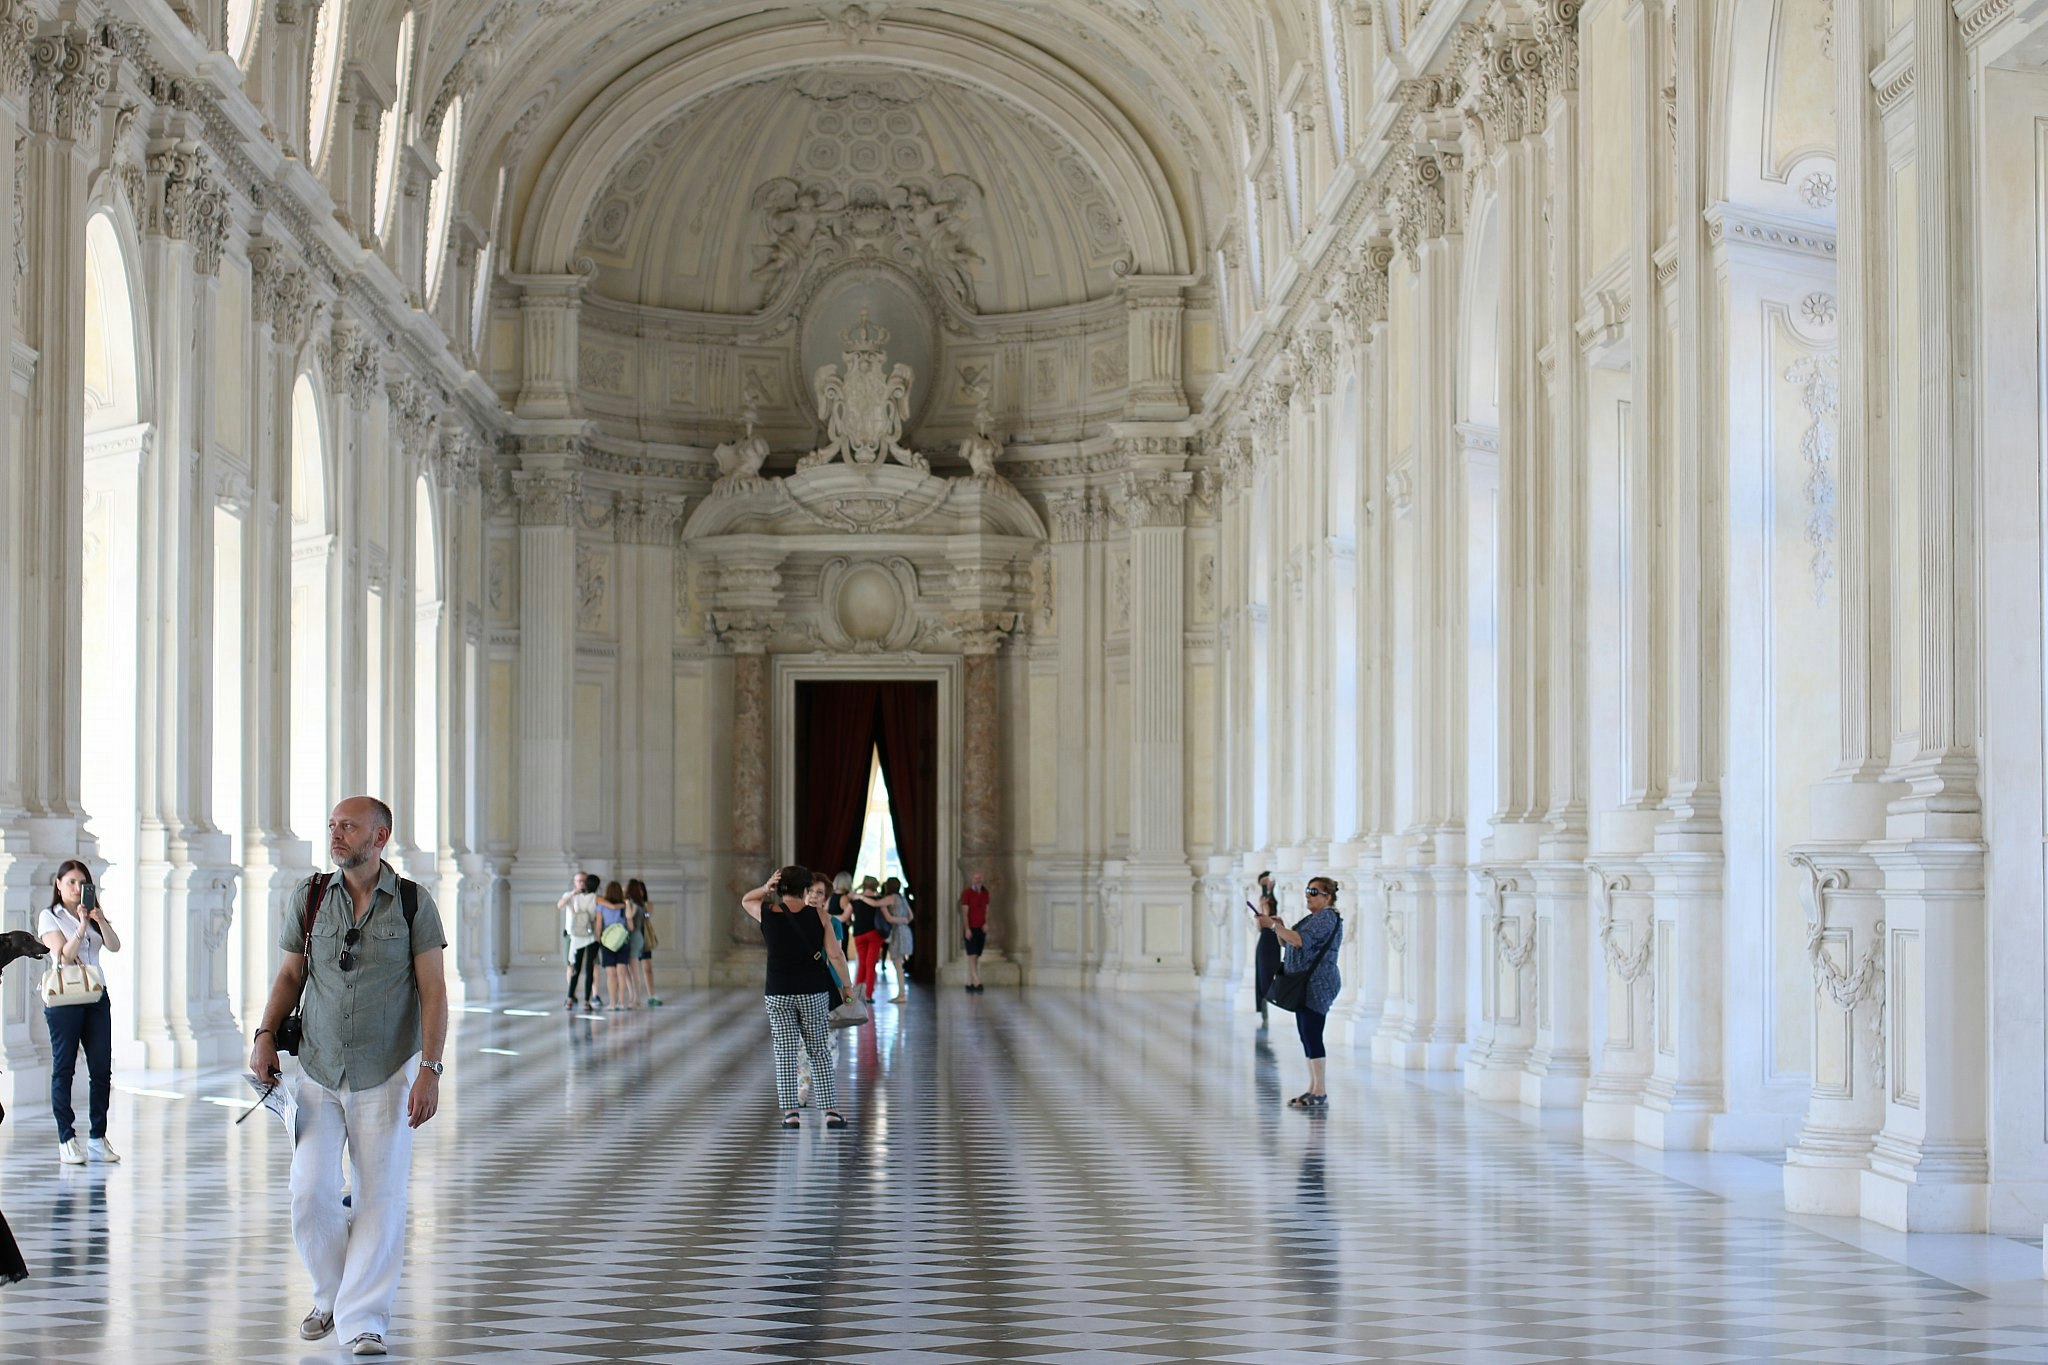 People walking through the Venaria Reale palace's vast baroque hallway with black-and-white marble tiles, ornate white columns and a domed ceiling.